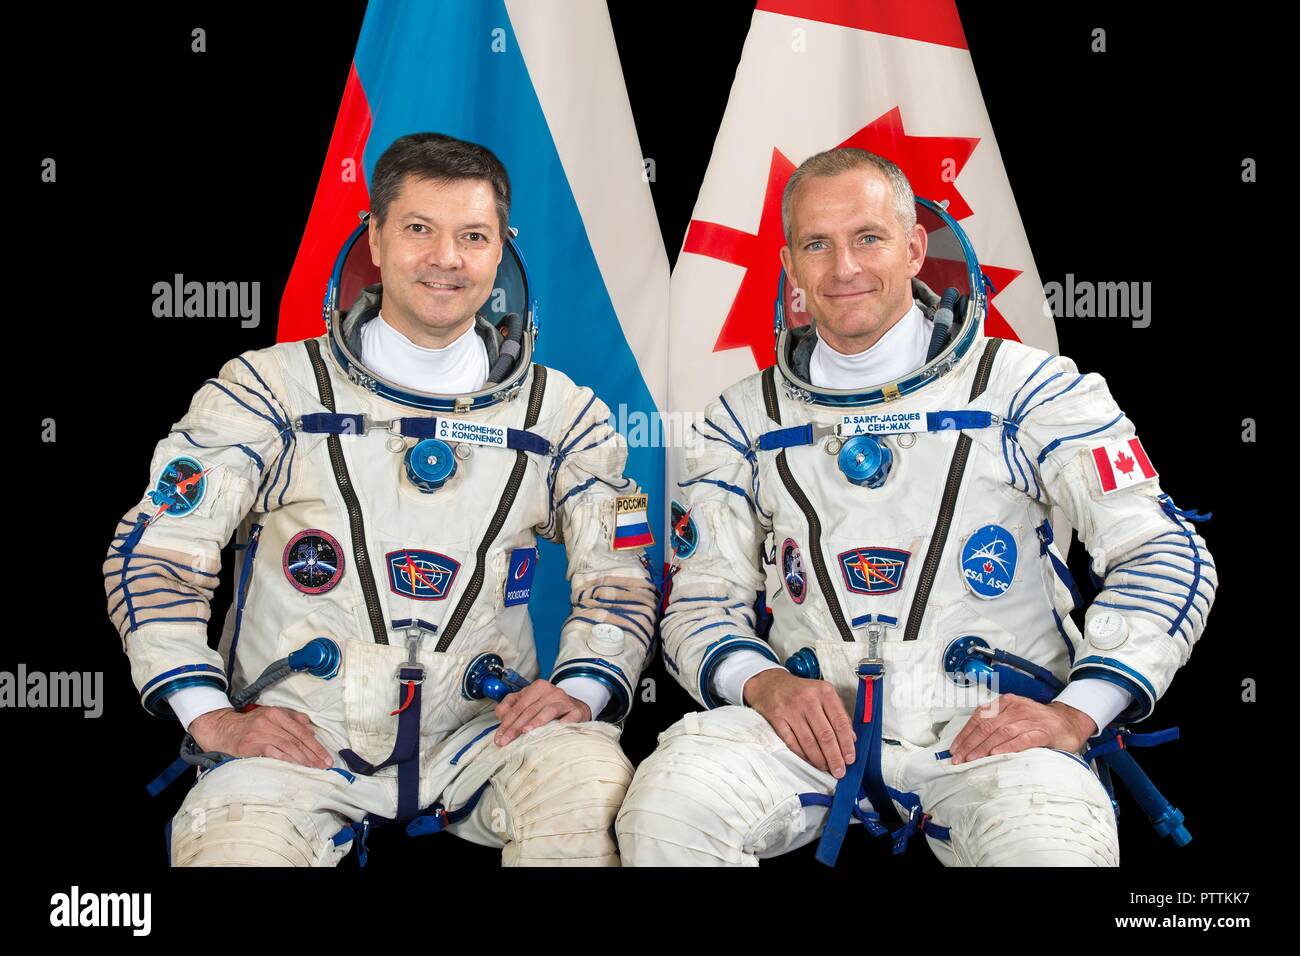 Expedition 57 backup crew members Oleg Kononenko of Roscosmos, left, and David Saint-Jacques of the Canadian Space Agency portrait in their Sokol launch and entry suits at the Gagarin Cosmonaut Training Center November 16, 2017 in Star City, Russia. International Space Station Expedition 57 crew Nick Hague of NASA and Alexey Ovchinin of Roscosmos are scheduled to launch on October 11th and will spend the next six months living and working aboard the International Space Station. Stock Photo